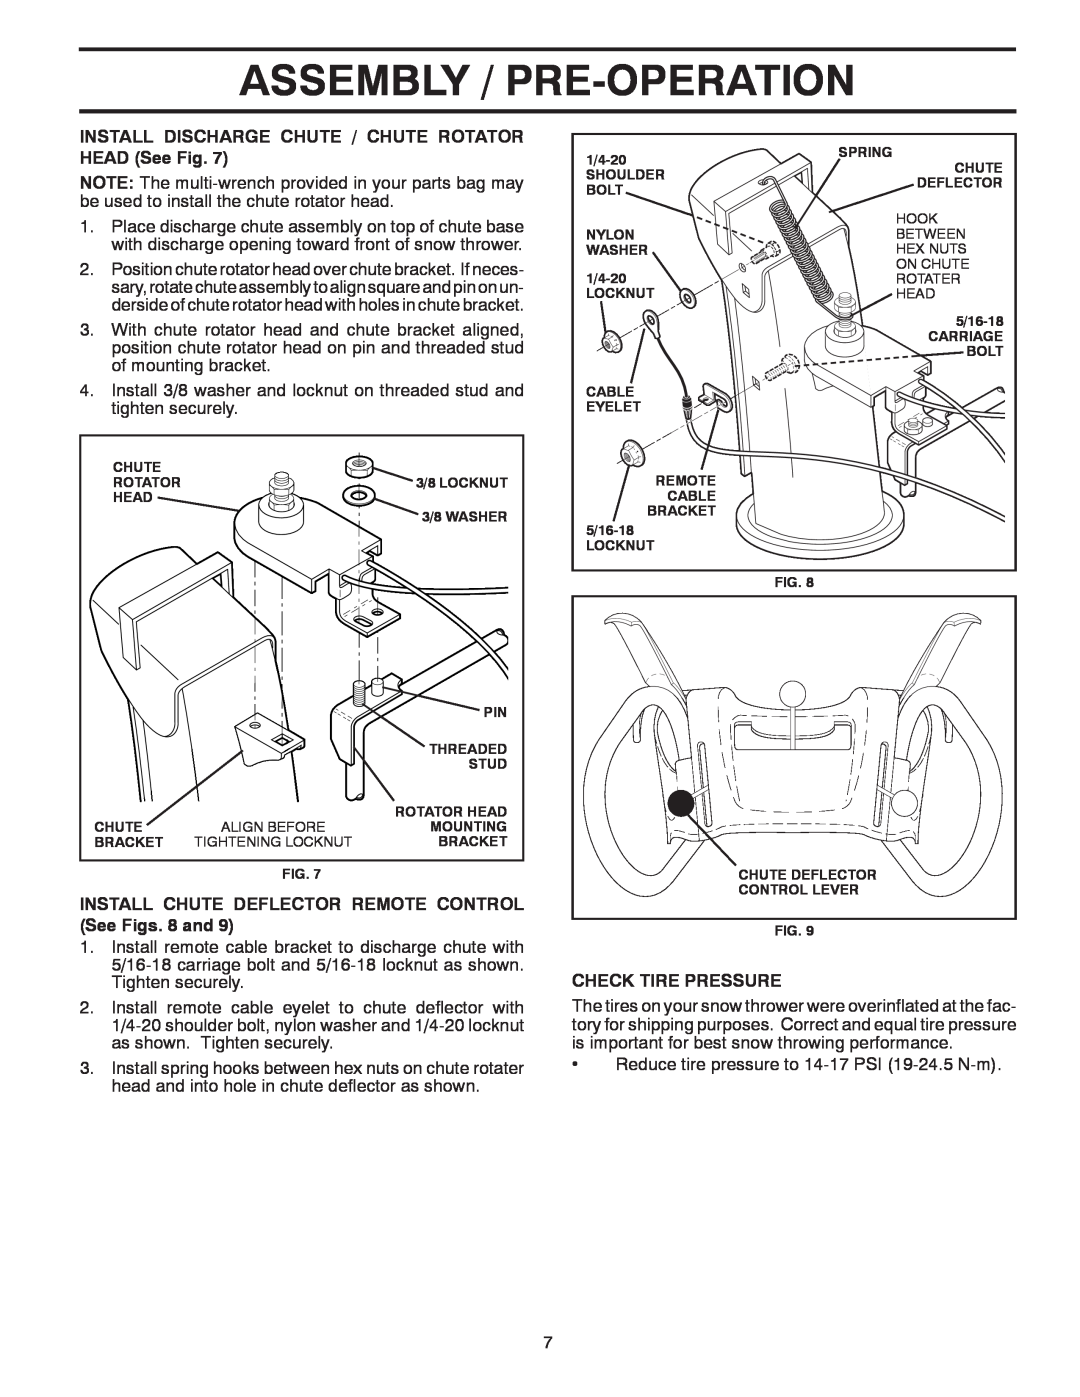 Poulan 414639 Assembly / Pre-Operation, INSTALL DISCHARGE CHUTE / CHUTE ROTATOR HEAD See Fig, Check Tire Pressure 